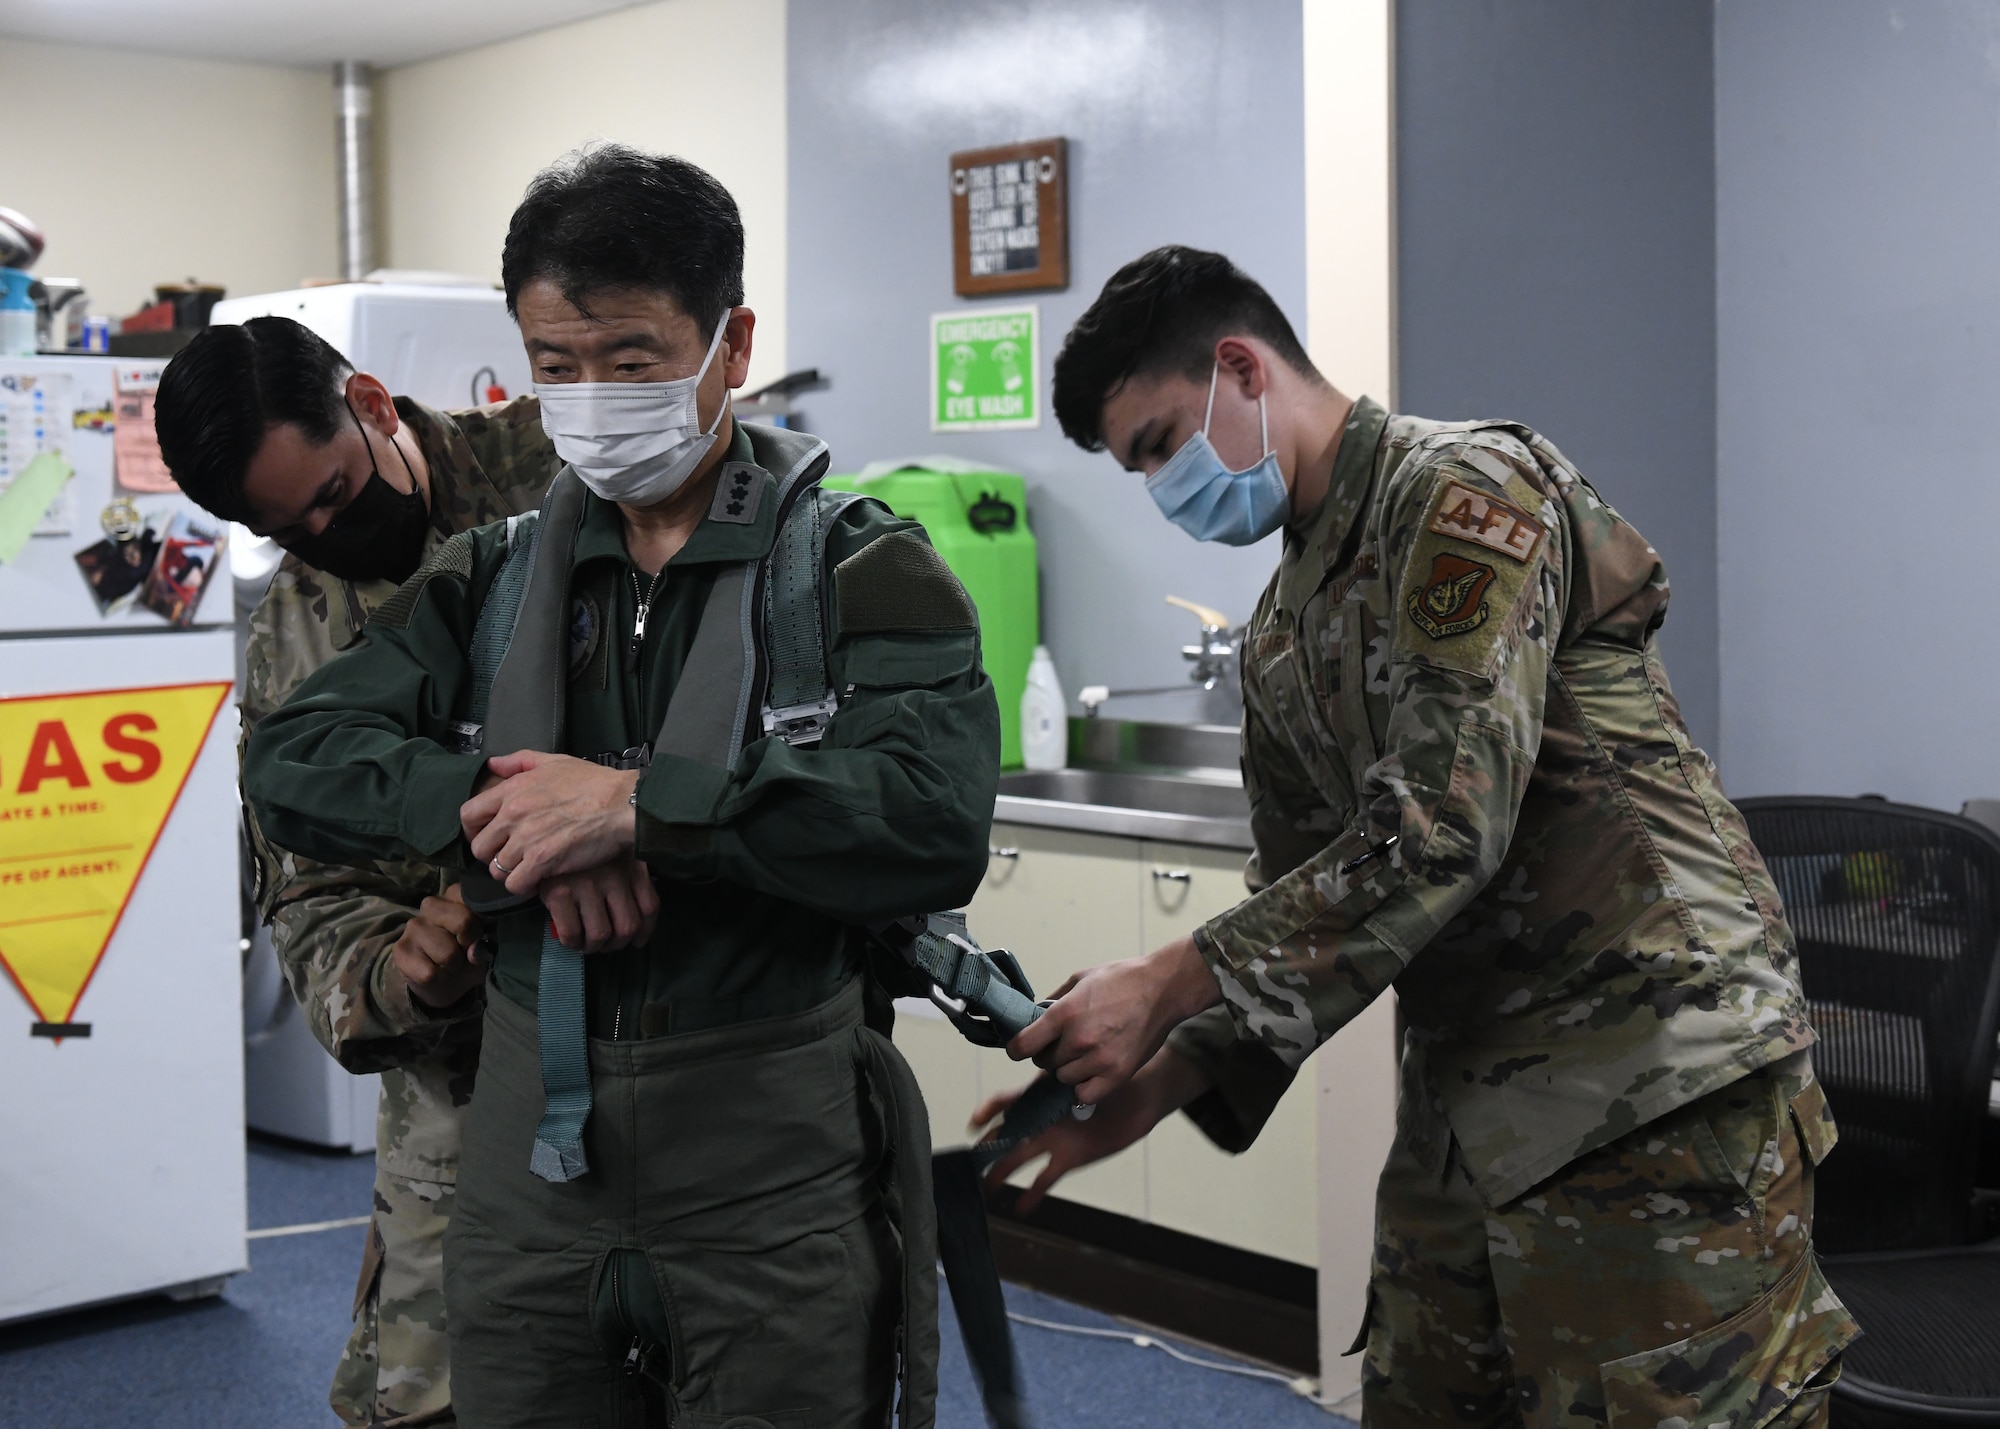 Aircrew flight equipment technicians assigned to the 18th Operations Support Squadron assist Japan Air Self-Defense Force Lt. Gen. Masahito Yajima, Southwestern Air Defense Force commander, in preparing for a familiarization flight at Kadena Air Base, Japan, April 12, 2022. Team Kadena Airmen routinely participate in training events and exercises with JASDF counterparts to strengthen interoperability, ensure the defense of Japan and maintain a free and open Indo-Pacific. (U.S. Air Force photo by Staff Sgt. Benjamin Raughton)